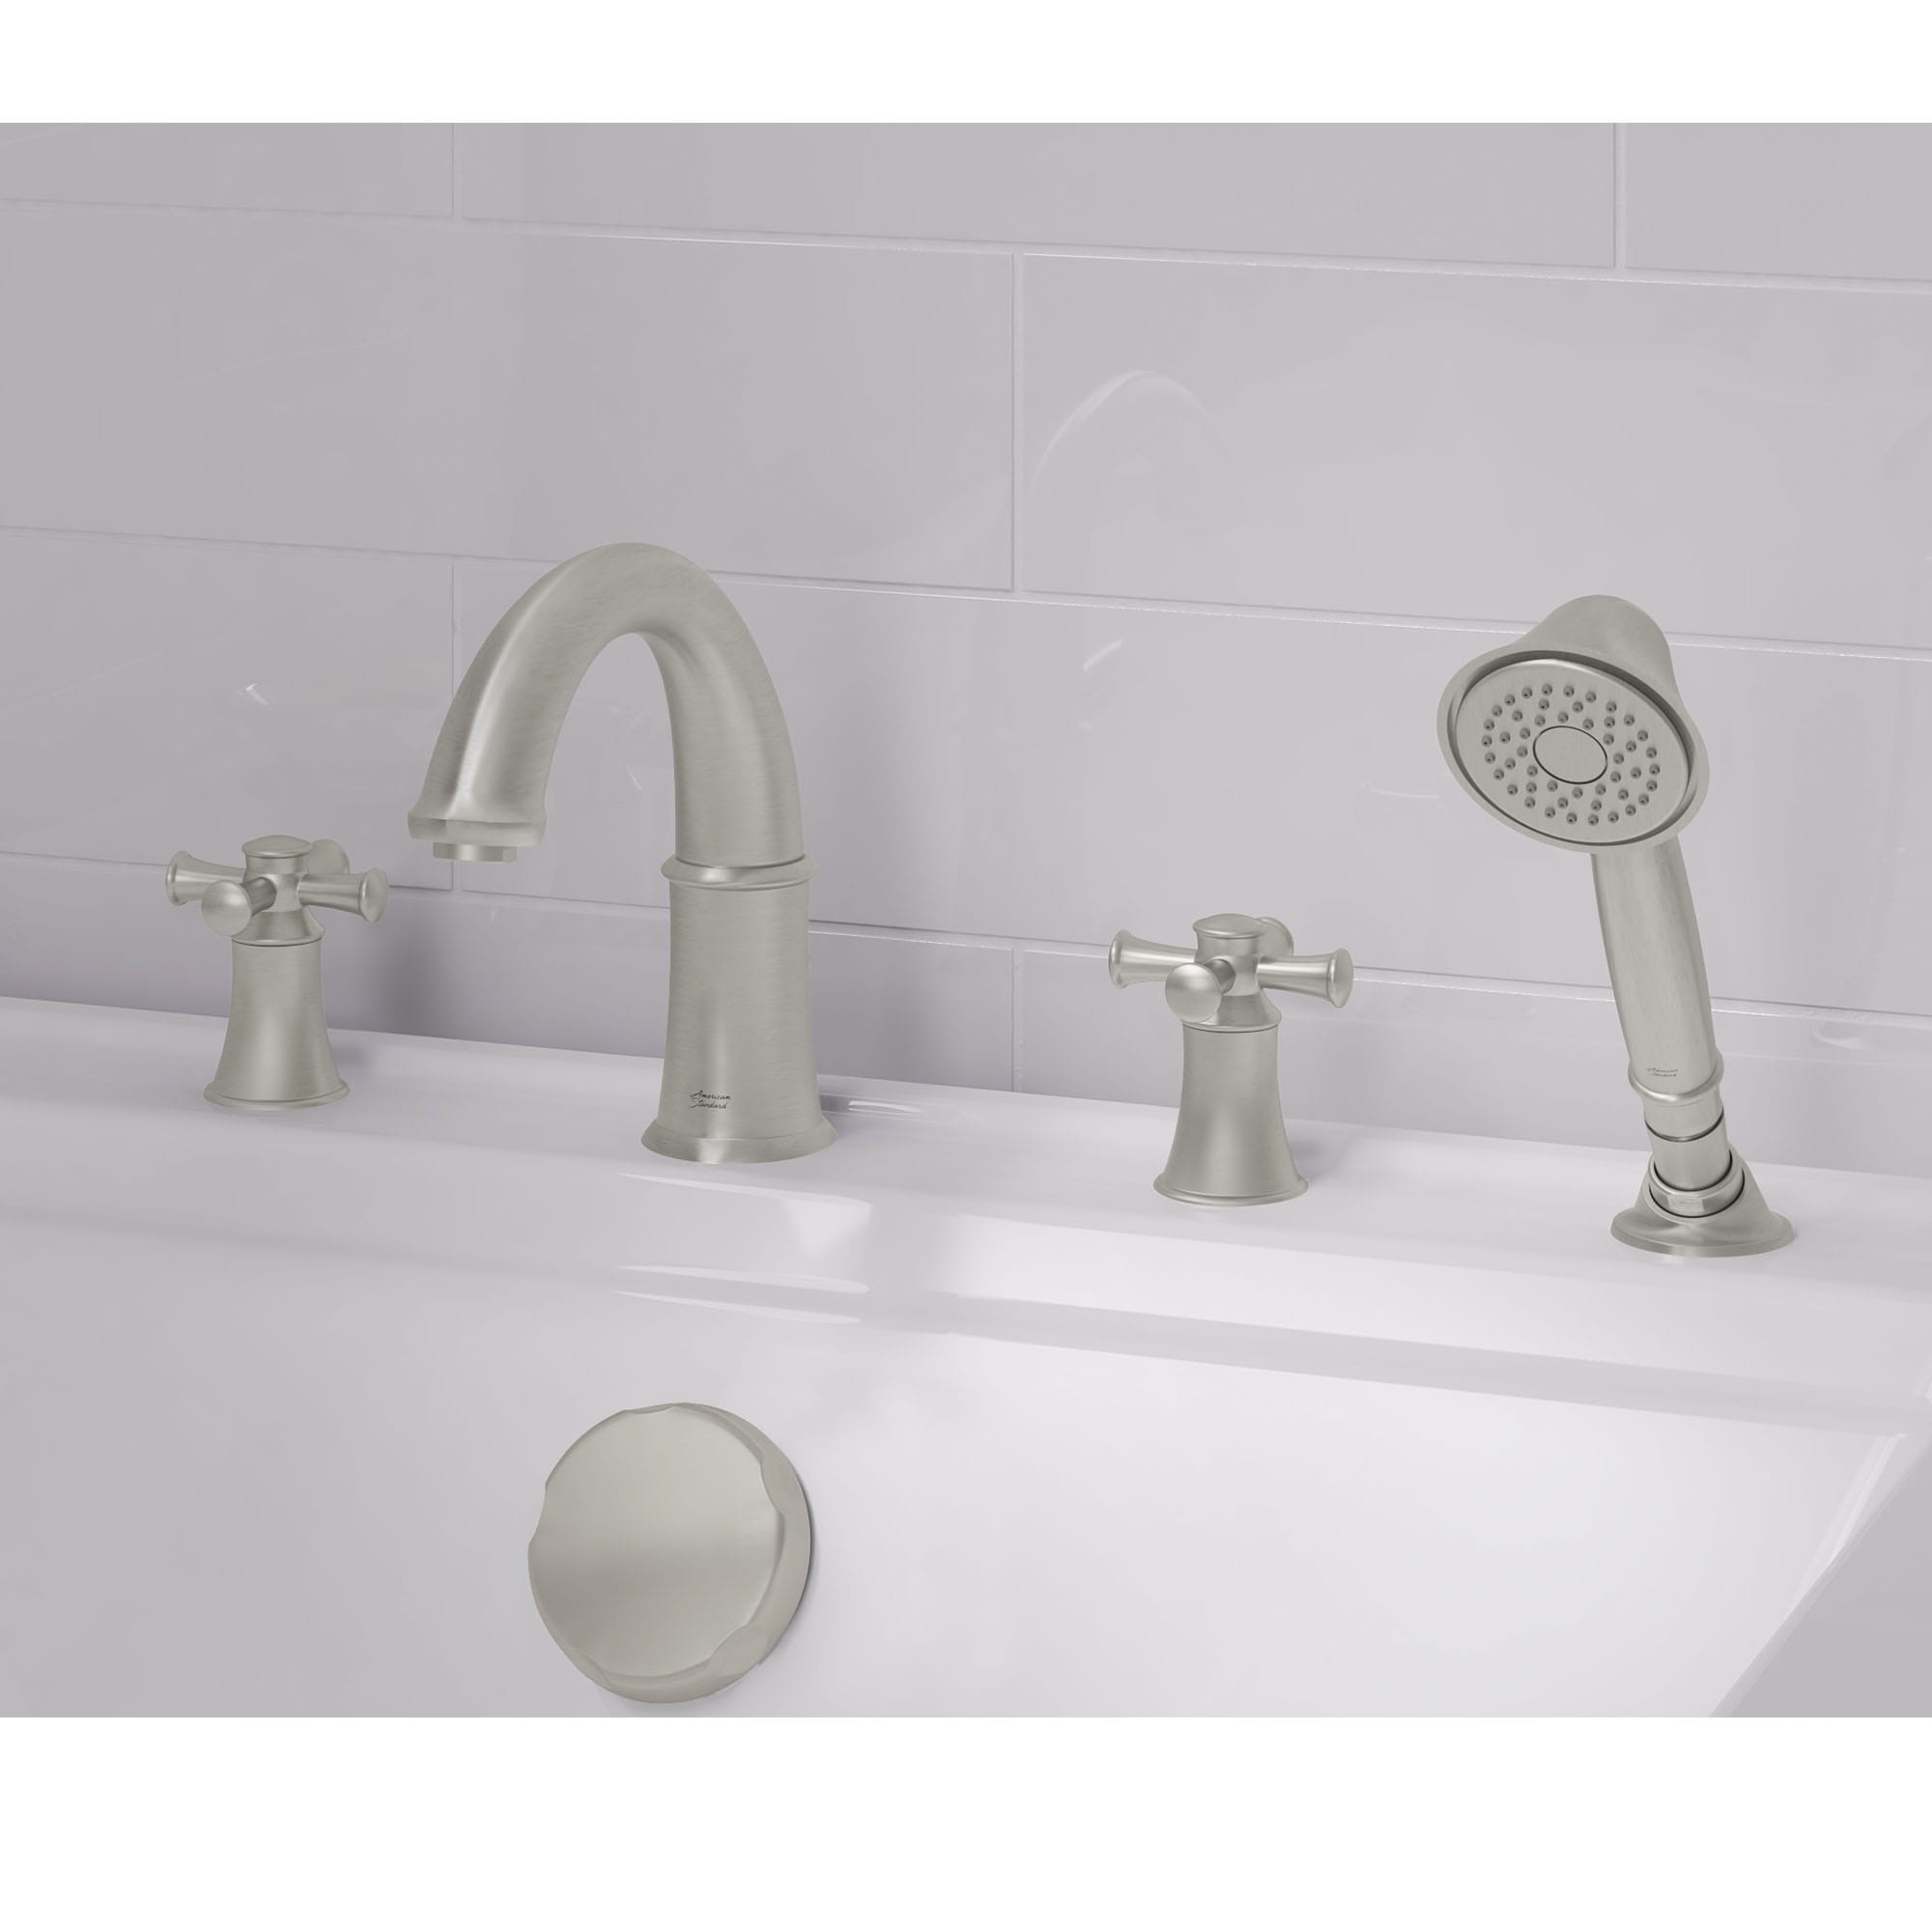 Portsmouth Bathtub Faucet with Personal Shower for Flash Rough in Valve with Cross Handles   BRUSHED NICKEL